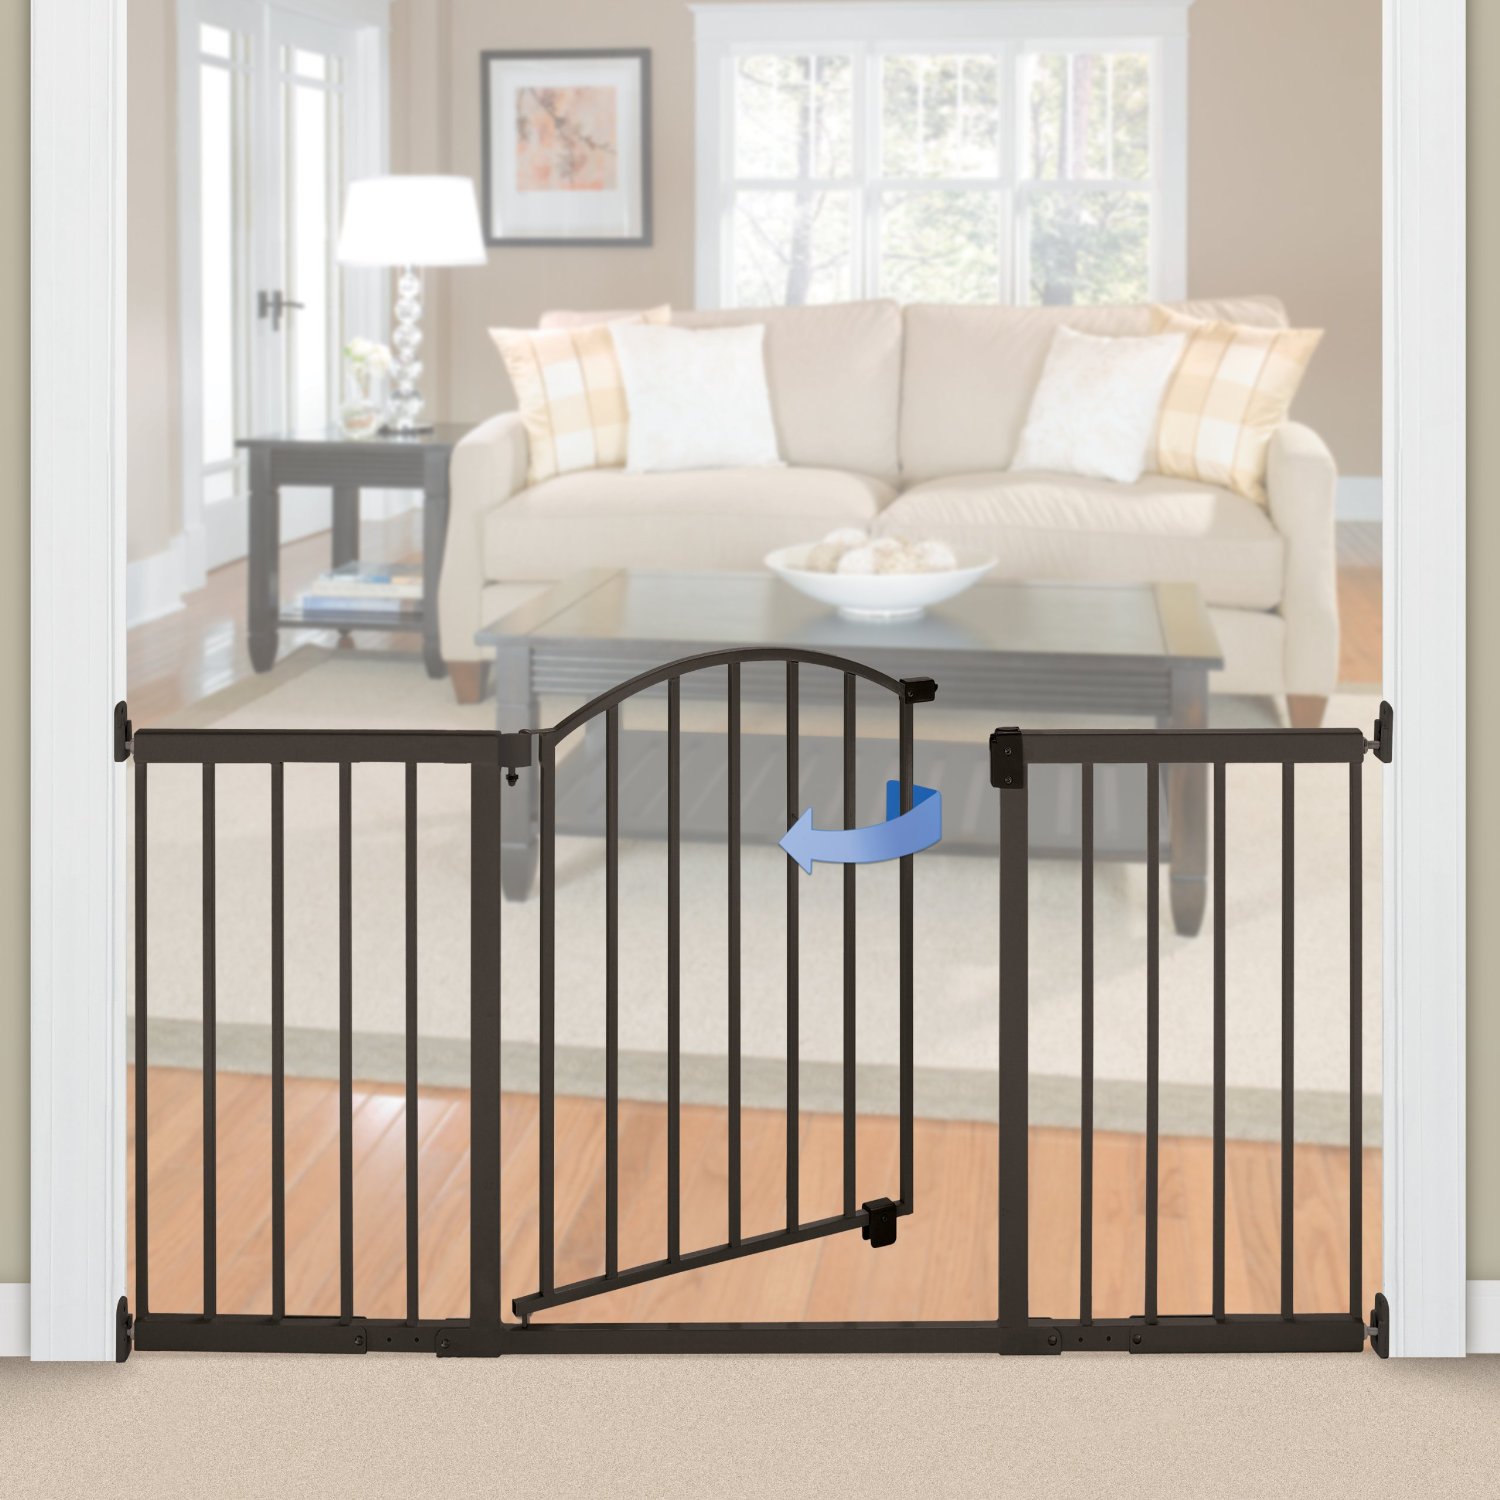 Read more about the article Child Safety Gates Installation